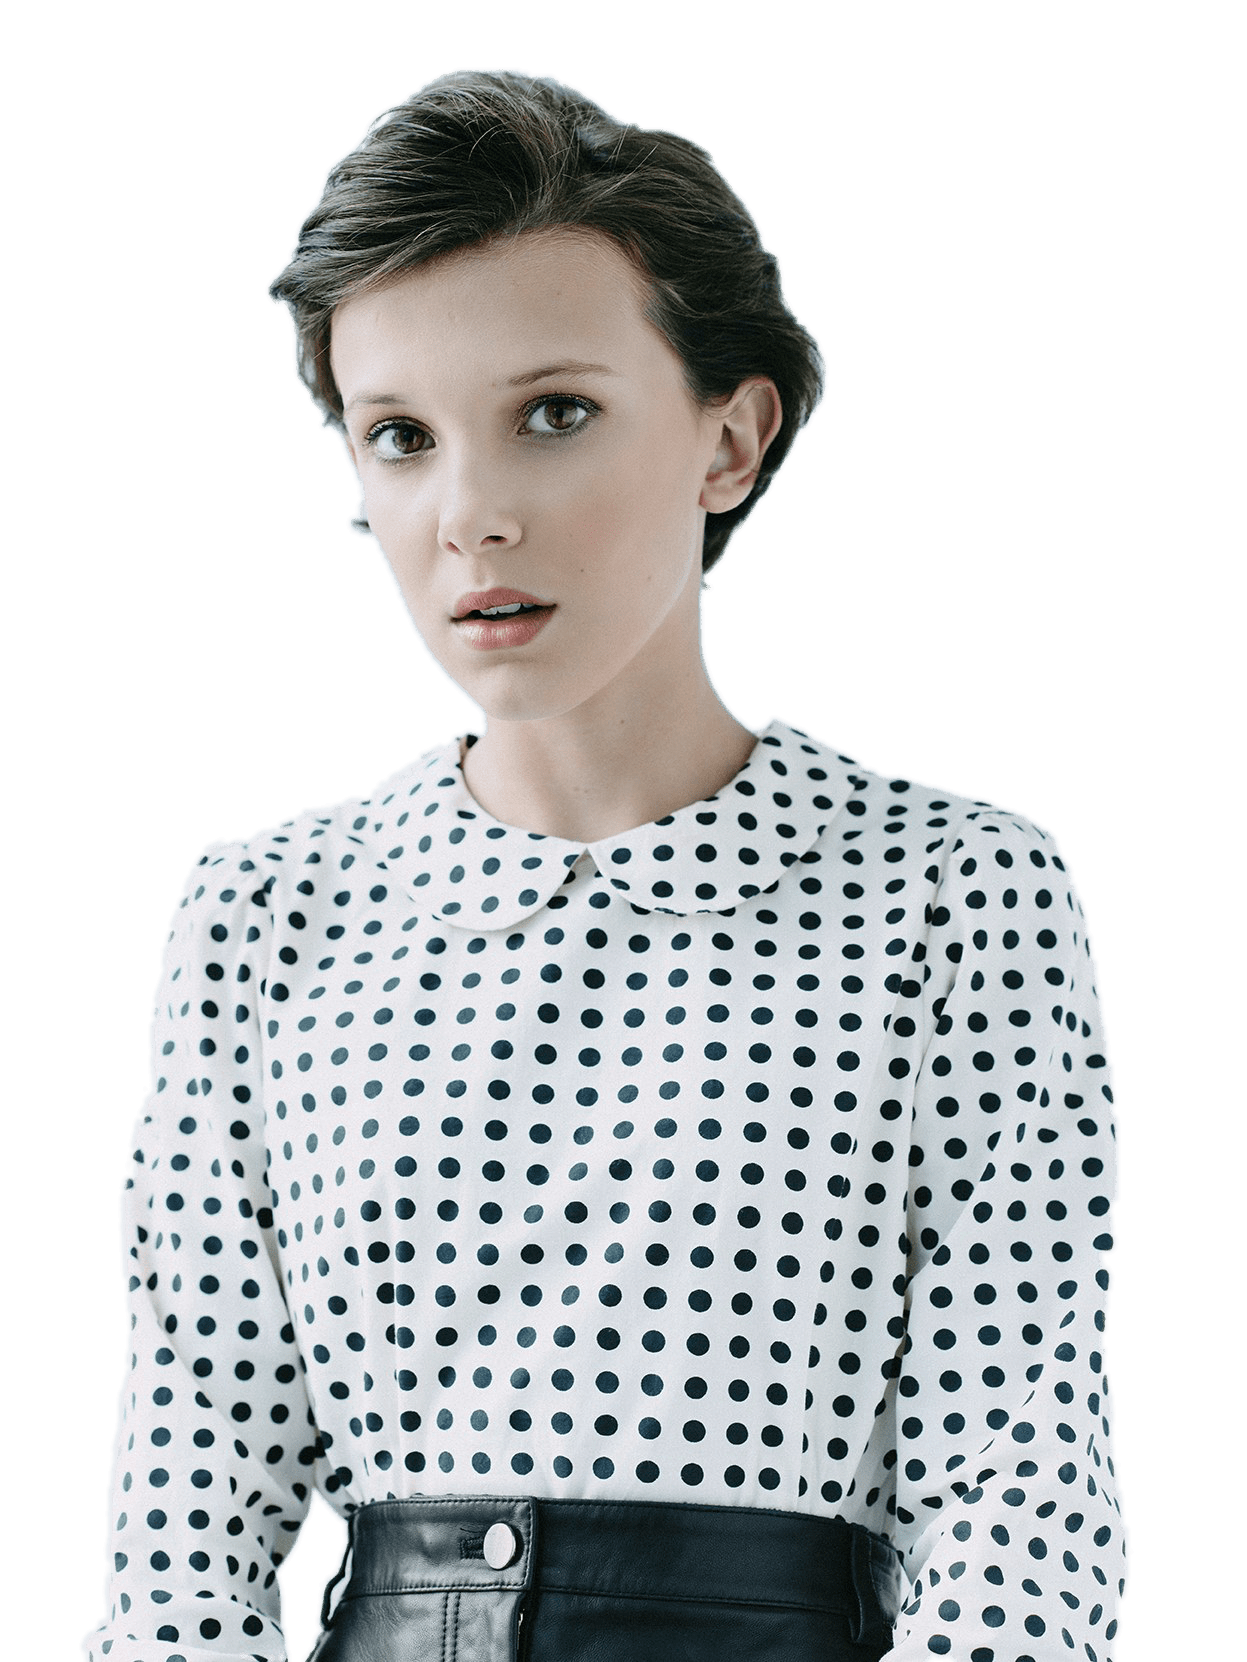 Millie Bobby Brown Background PNG